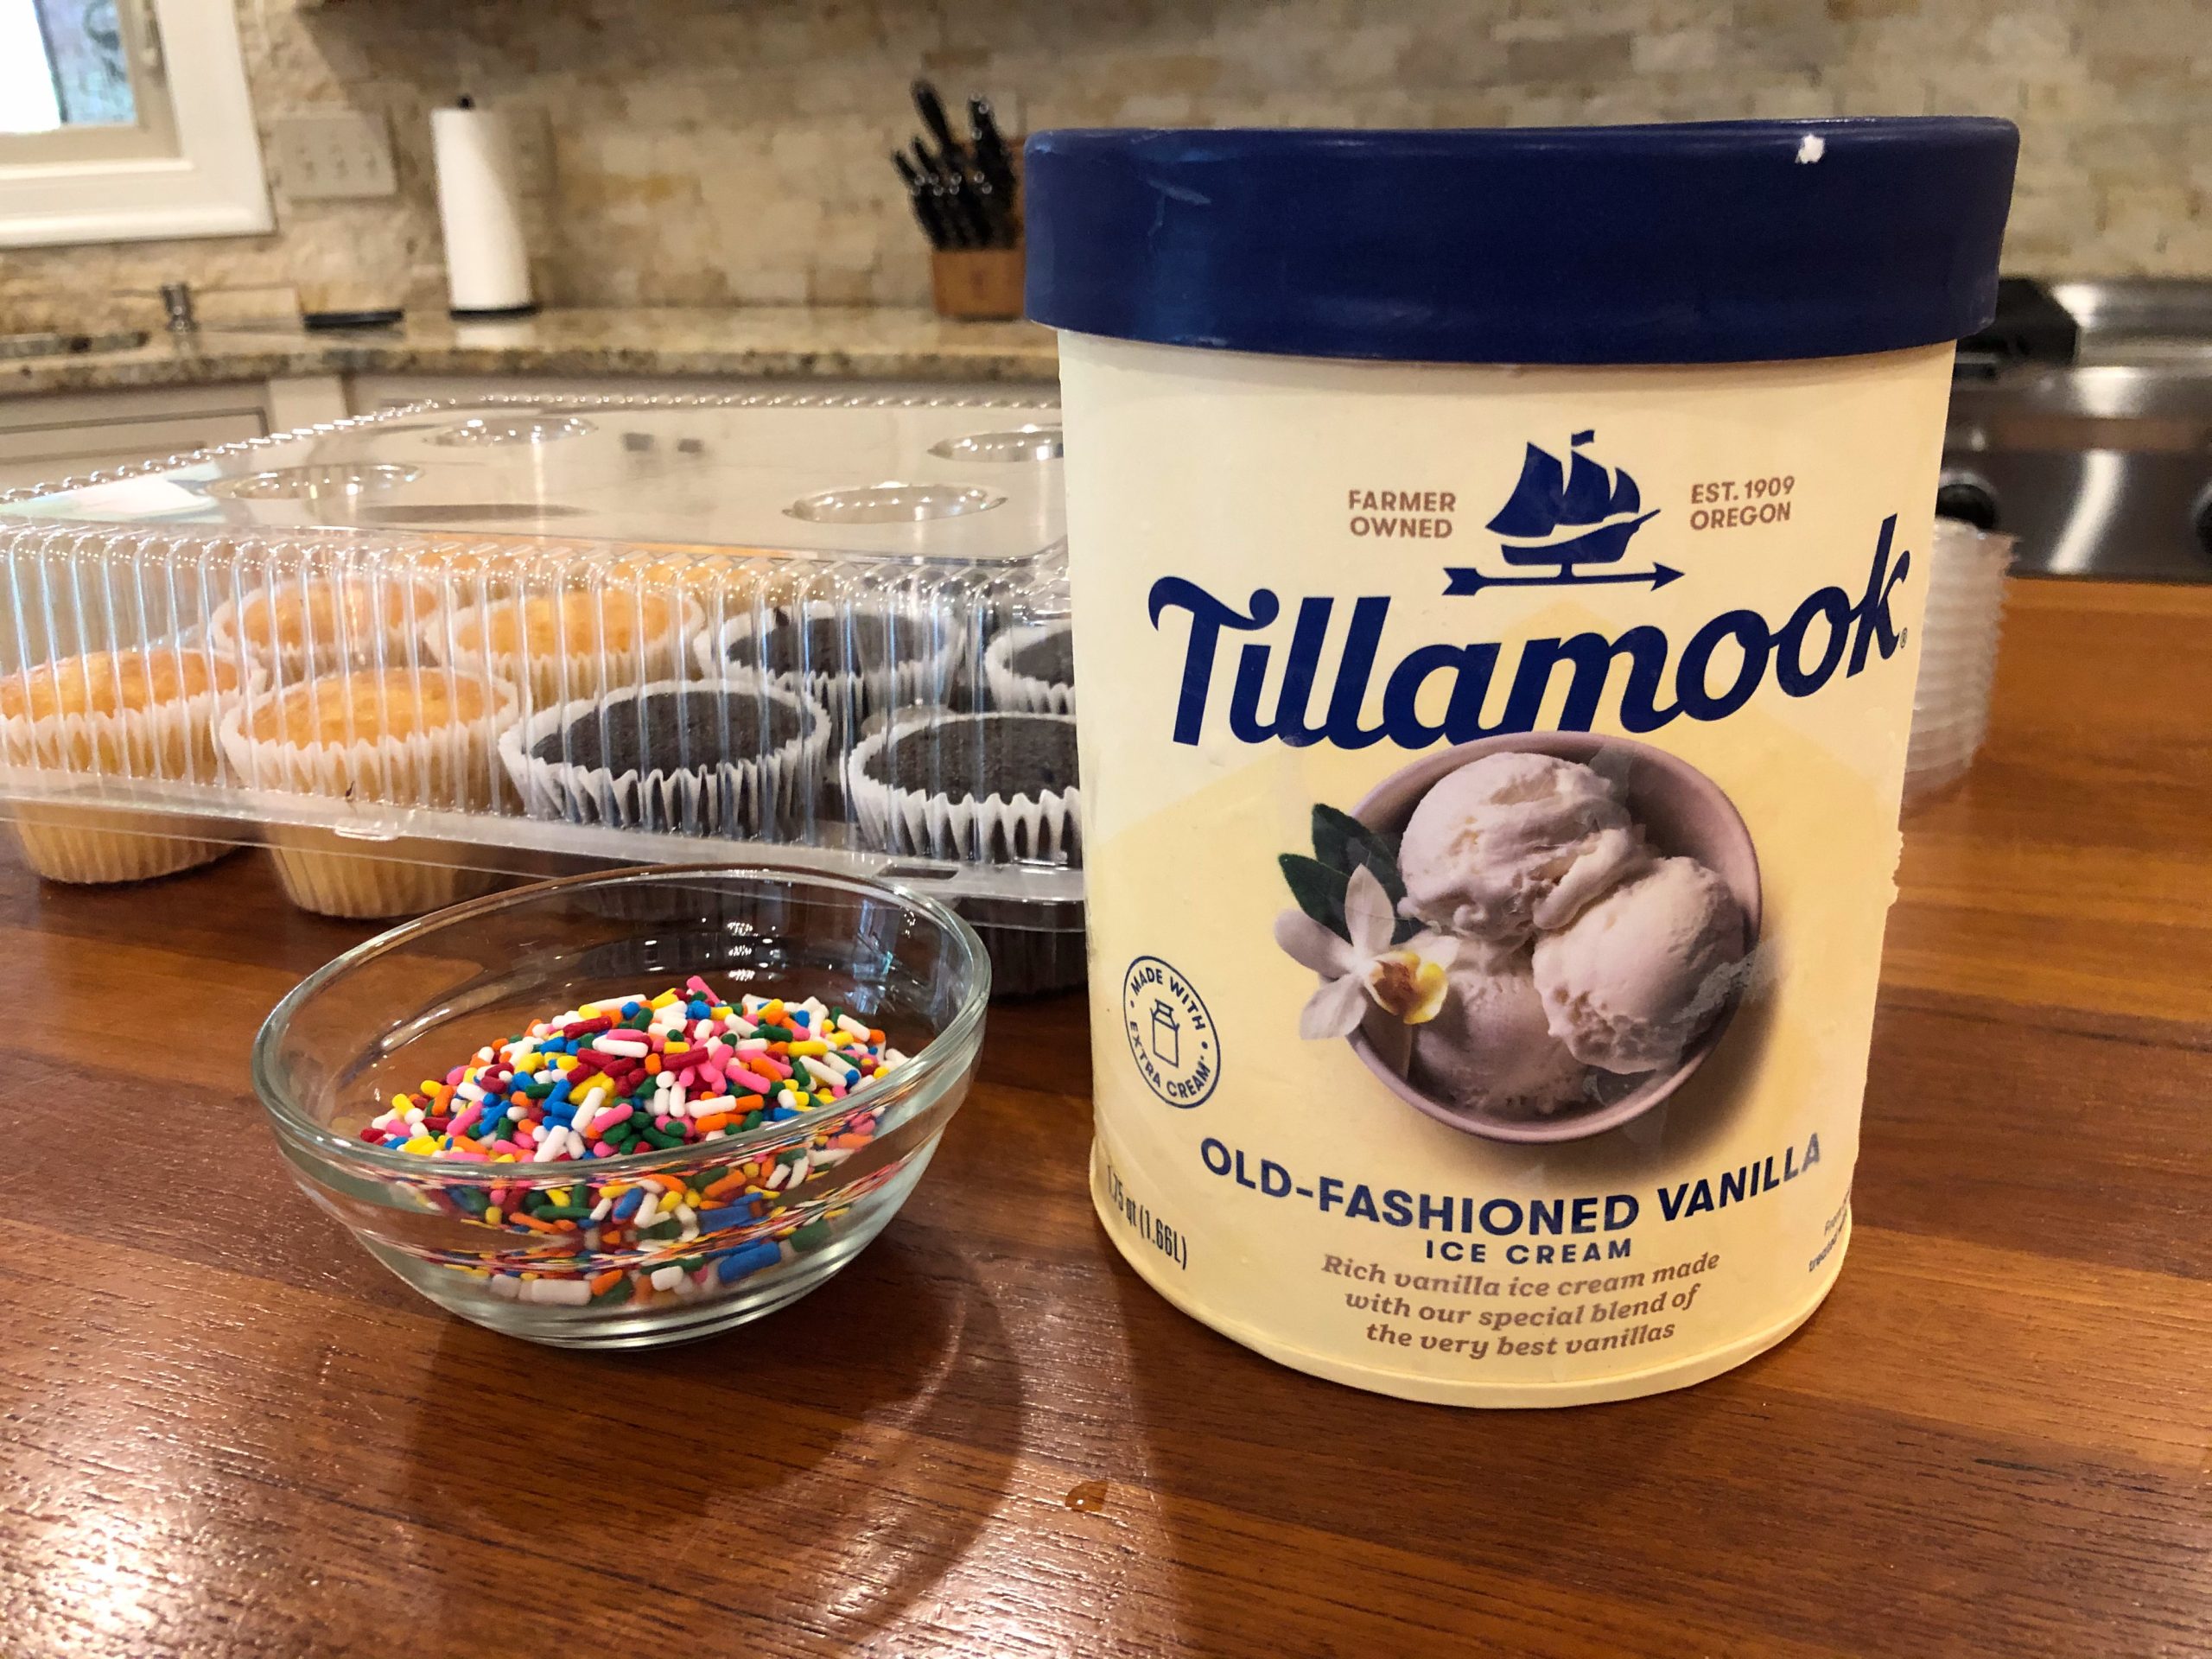 Make Your Summer Day Delicious With Tillamook - Load The Digital Coupon And Save! on I Heart Publix 1